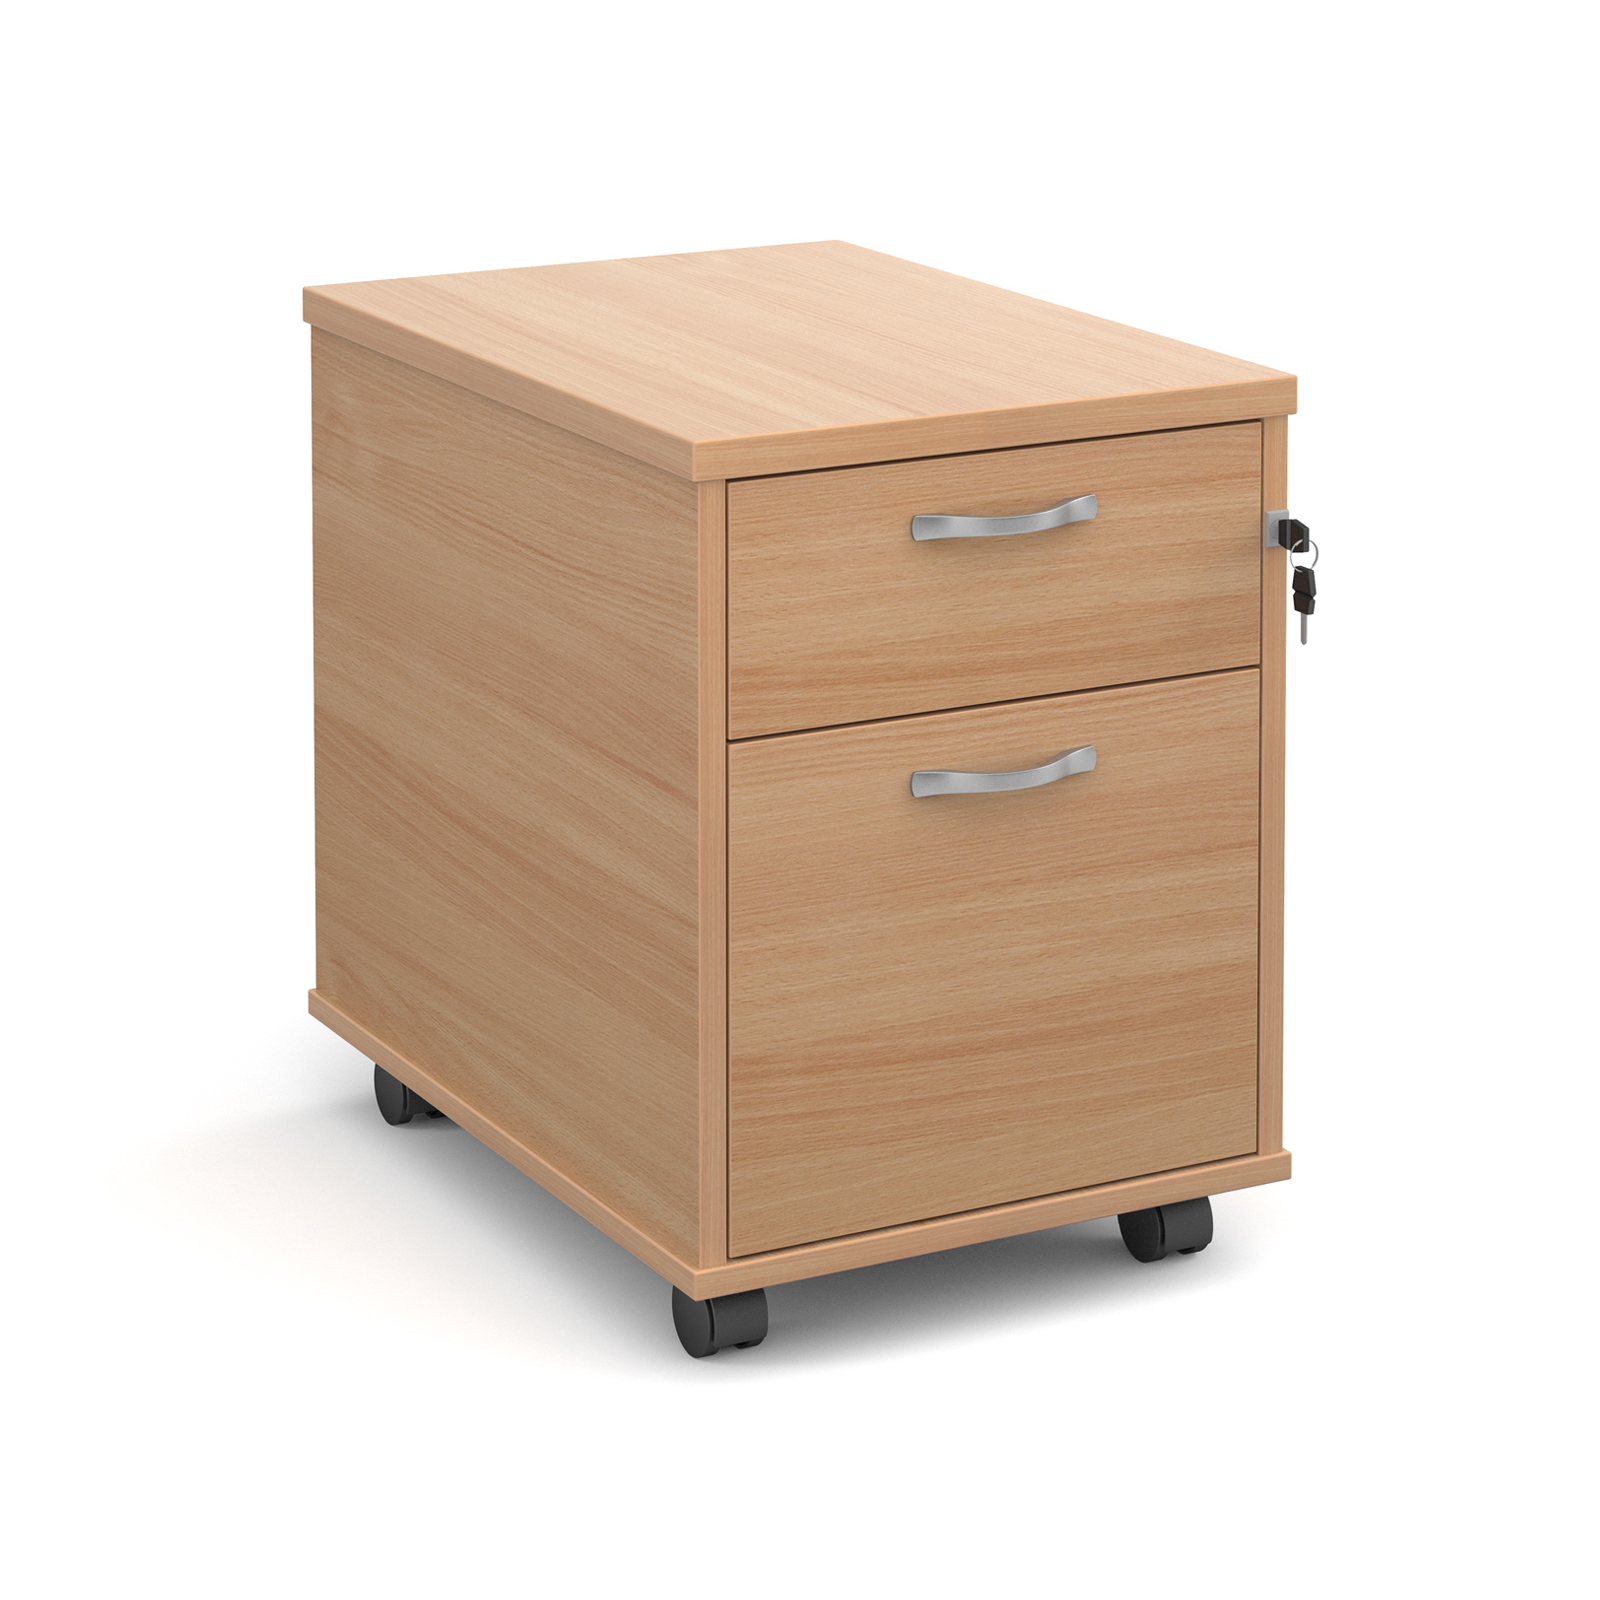 2 Drawer Mobile 2 drawer pedestal with silver handles 600mm deep - beech